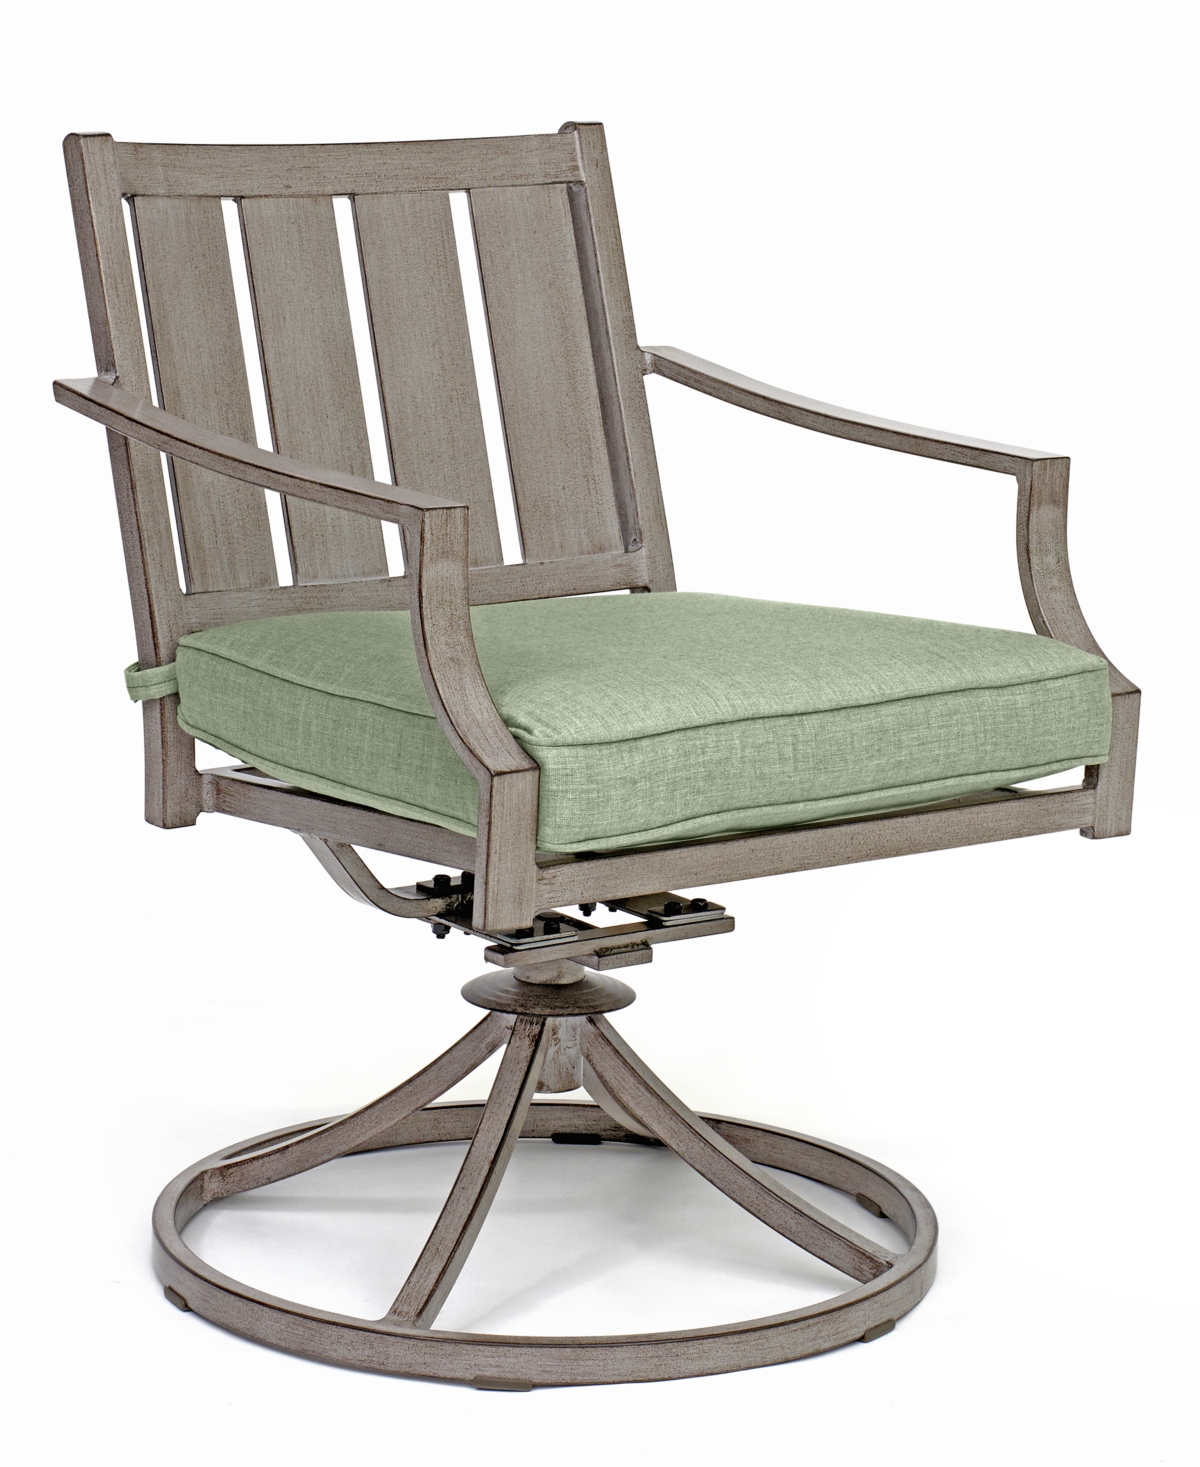 Agio Set Of 2 Wayland Outdoor Swivel Chairs, Created For Macy's In Outdura Grasshopper